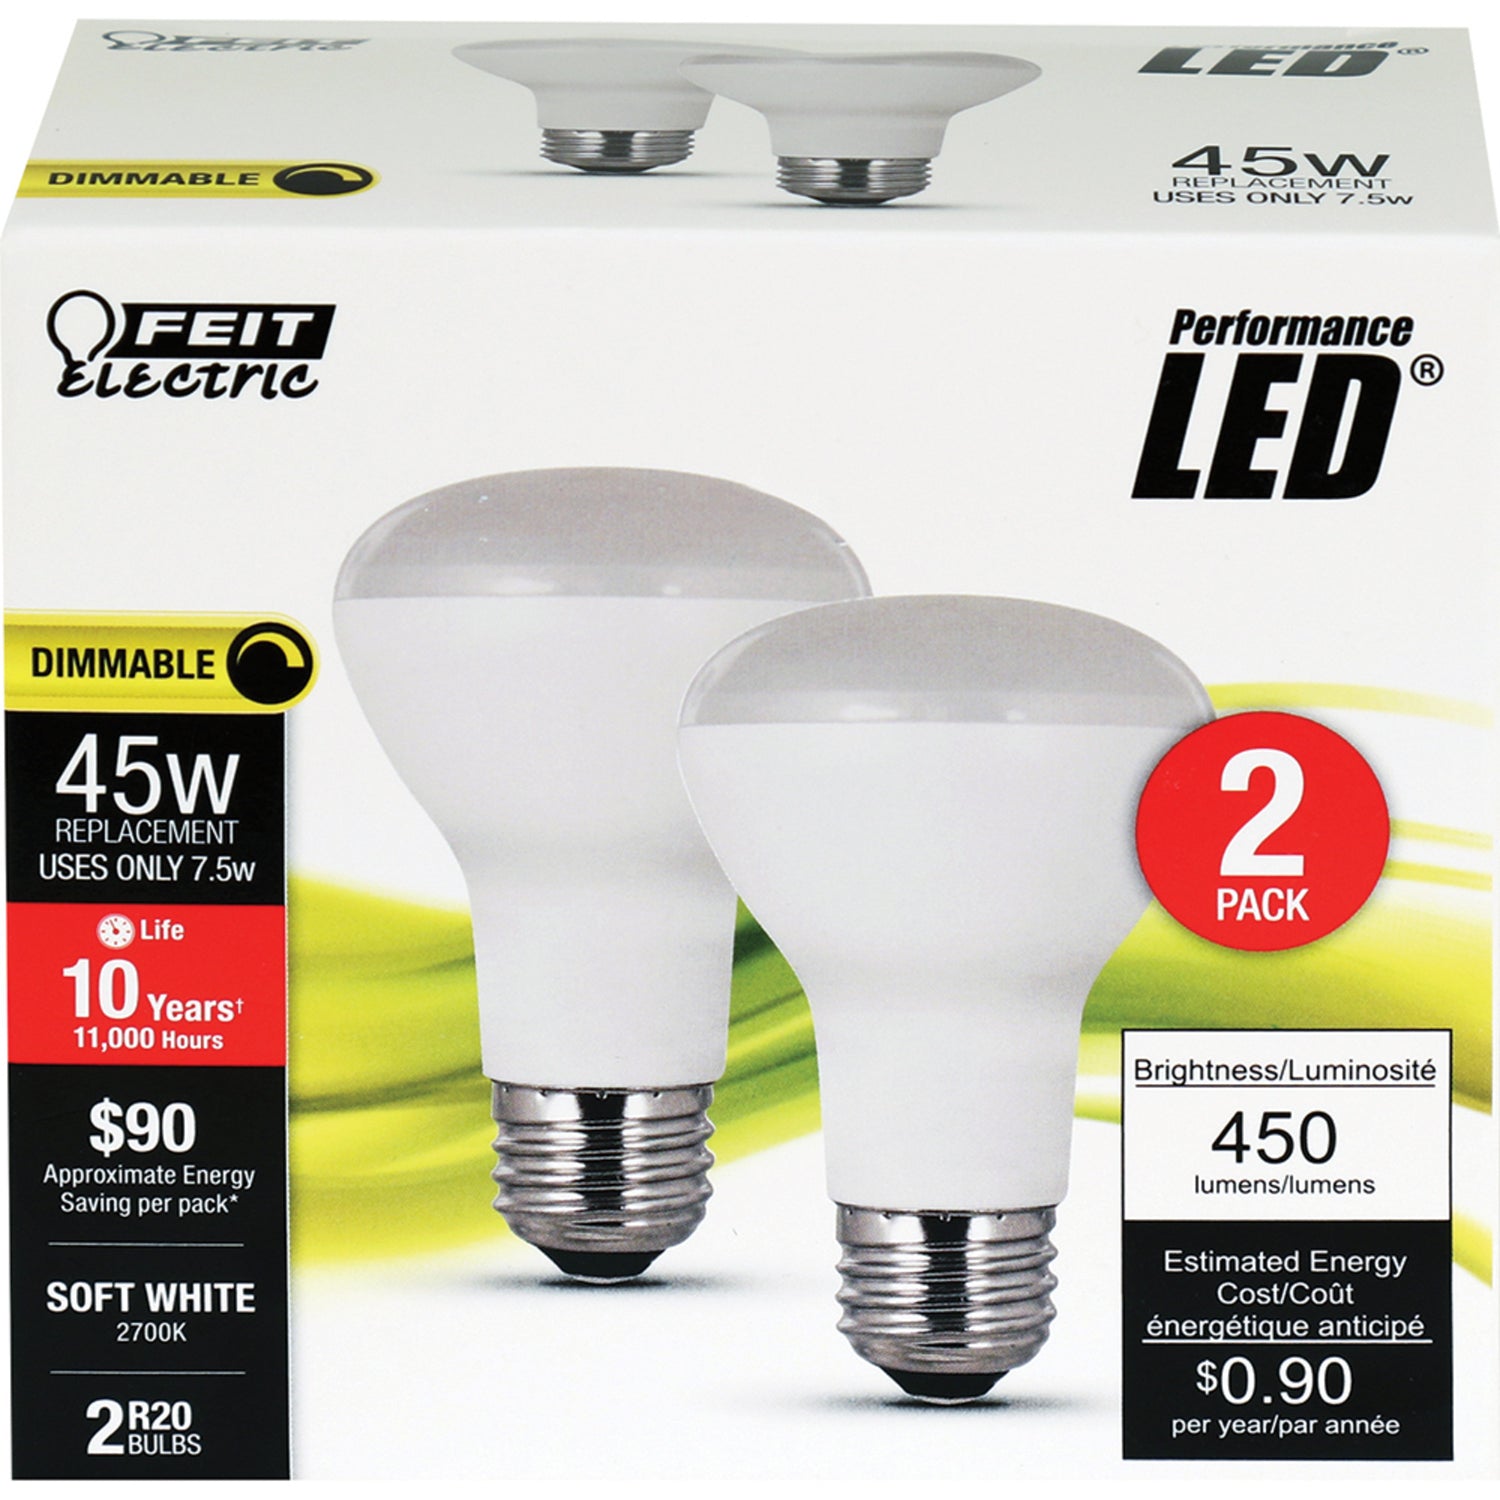 7.5W (45W Replacement) Soft White (2700K) E26 R20 Dimmable Reflector LED Light Bulb (2-Pack)